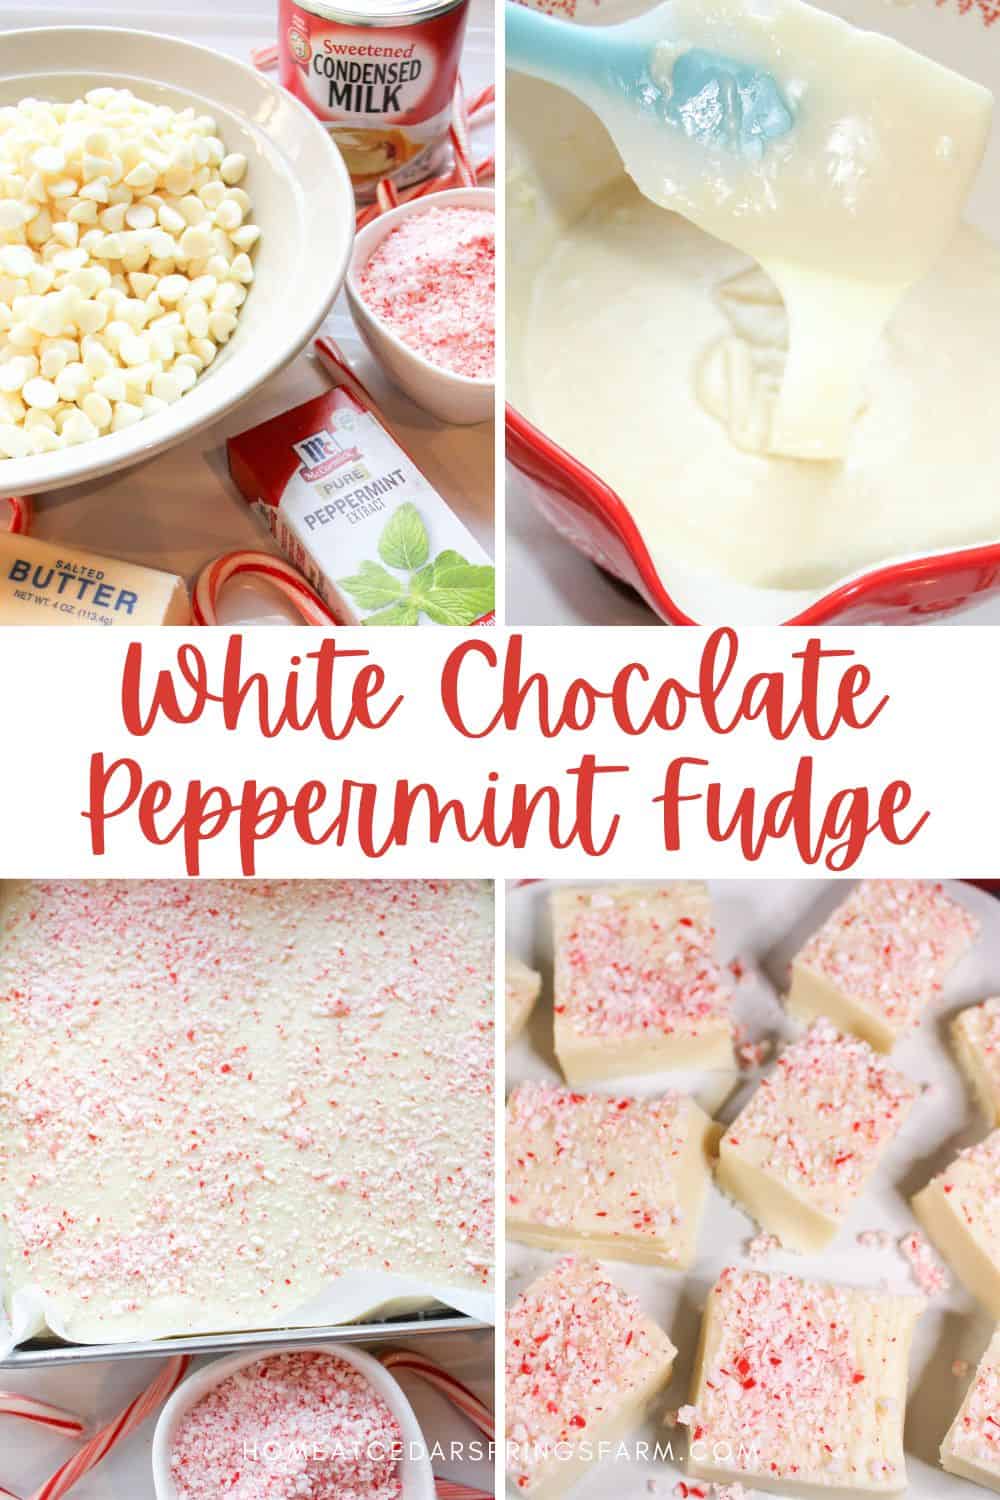 Steps shown for making white chocolate peppermint fudge.